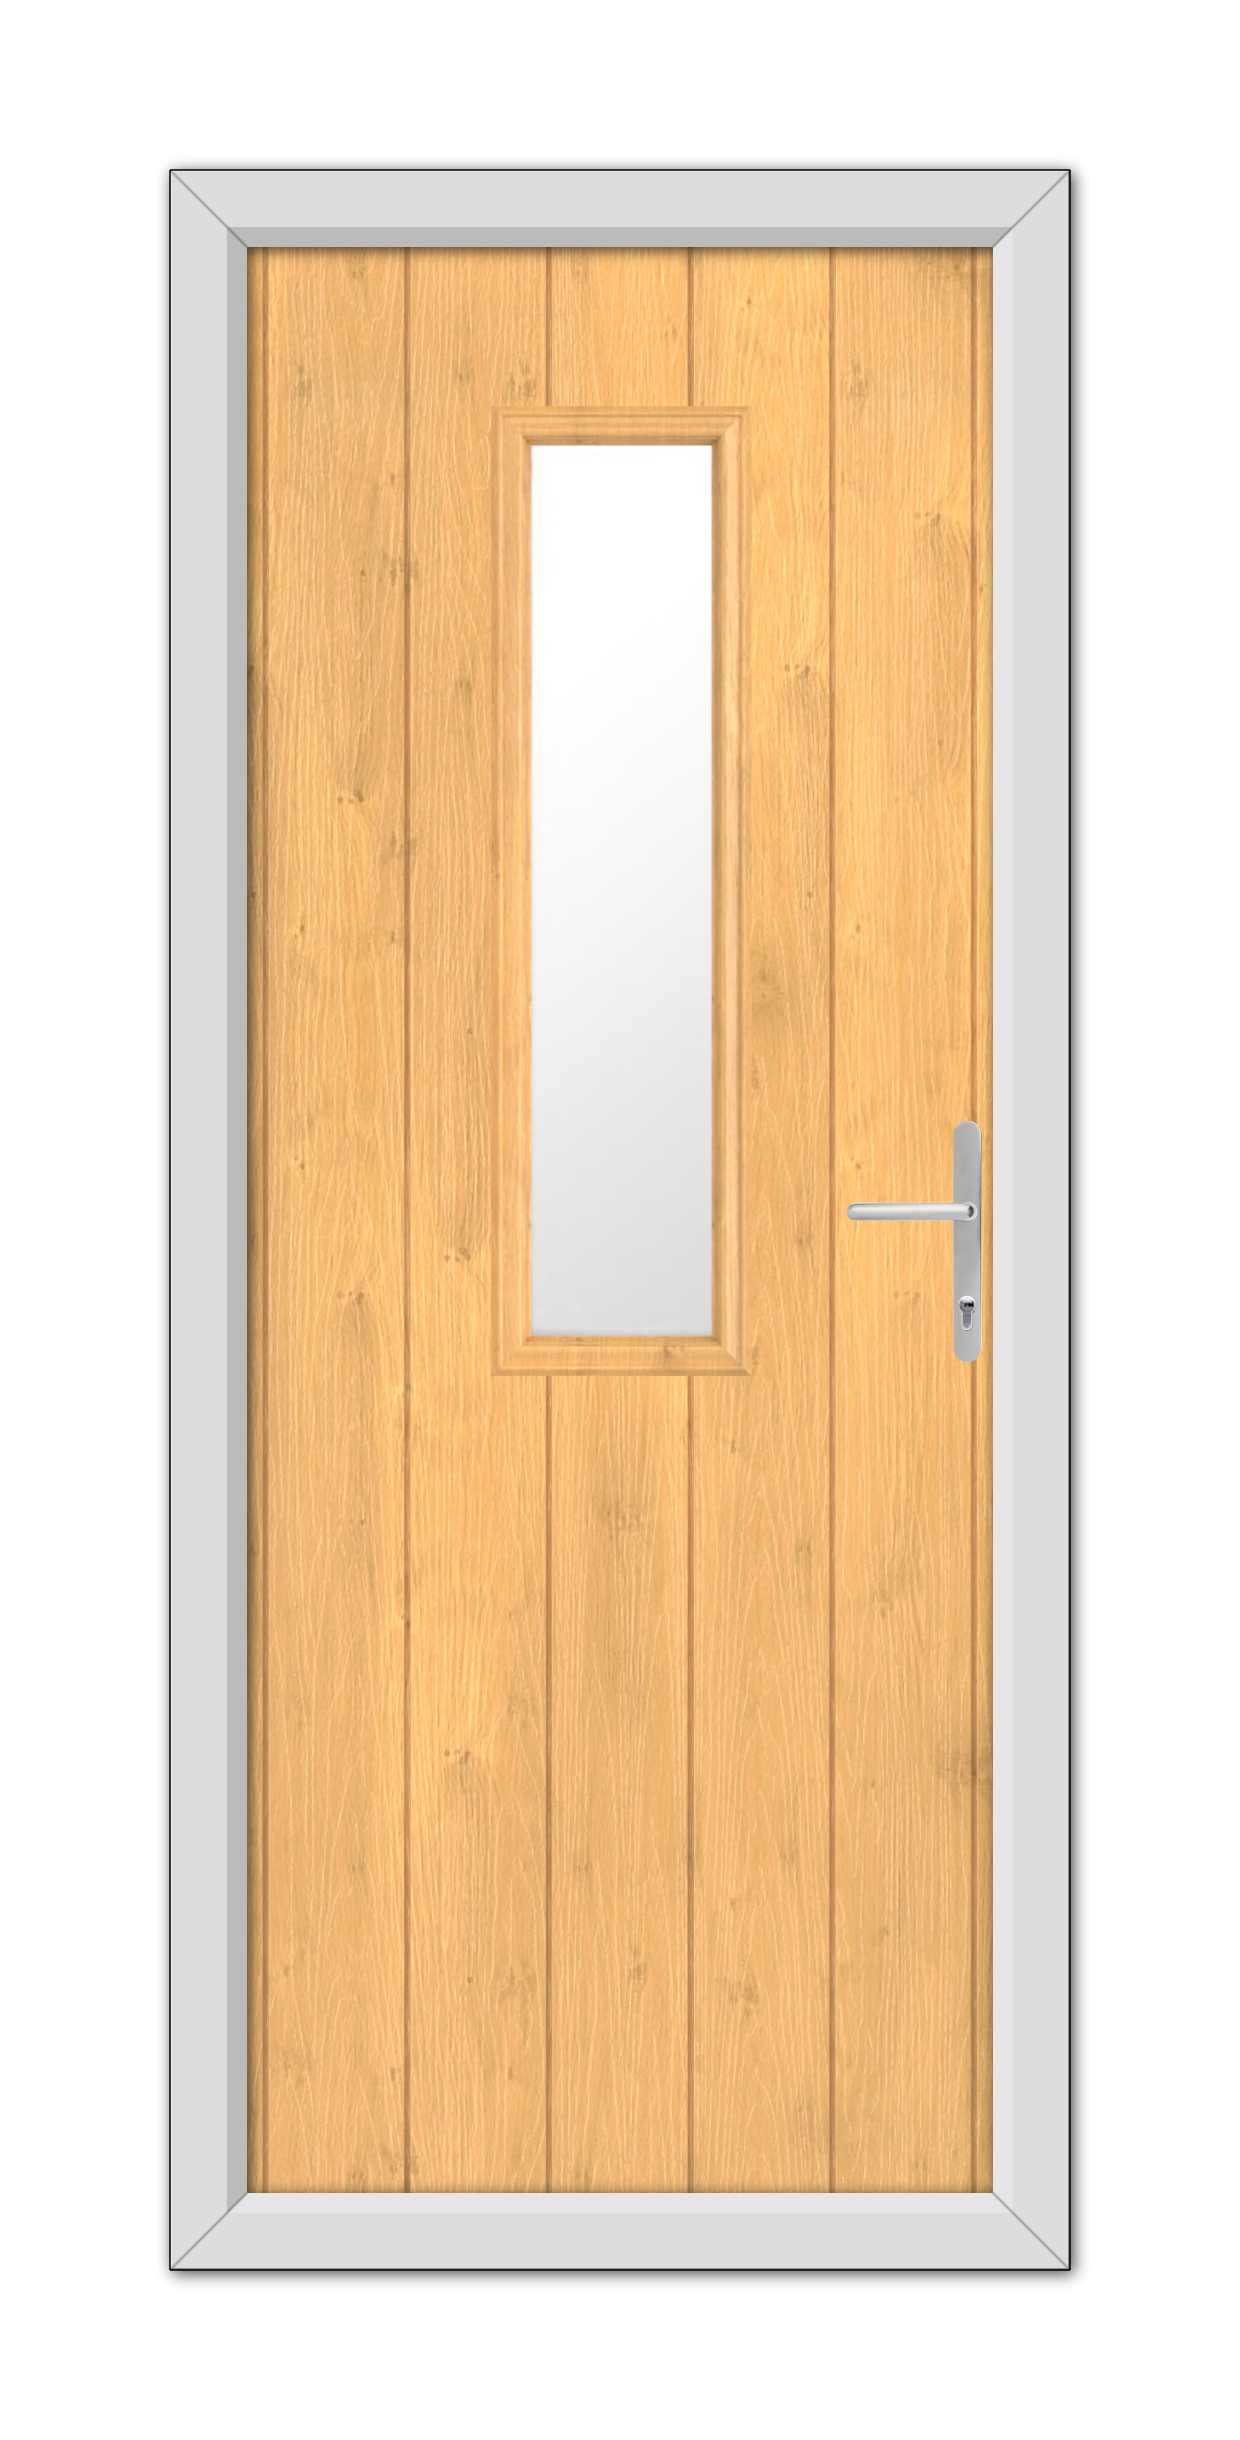 A Irish Oak Mowbray Composite Door 48mm Timber Core with a vertical rectangular window, framed in metal with a simple handle on the right side.